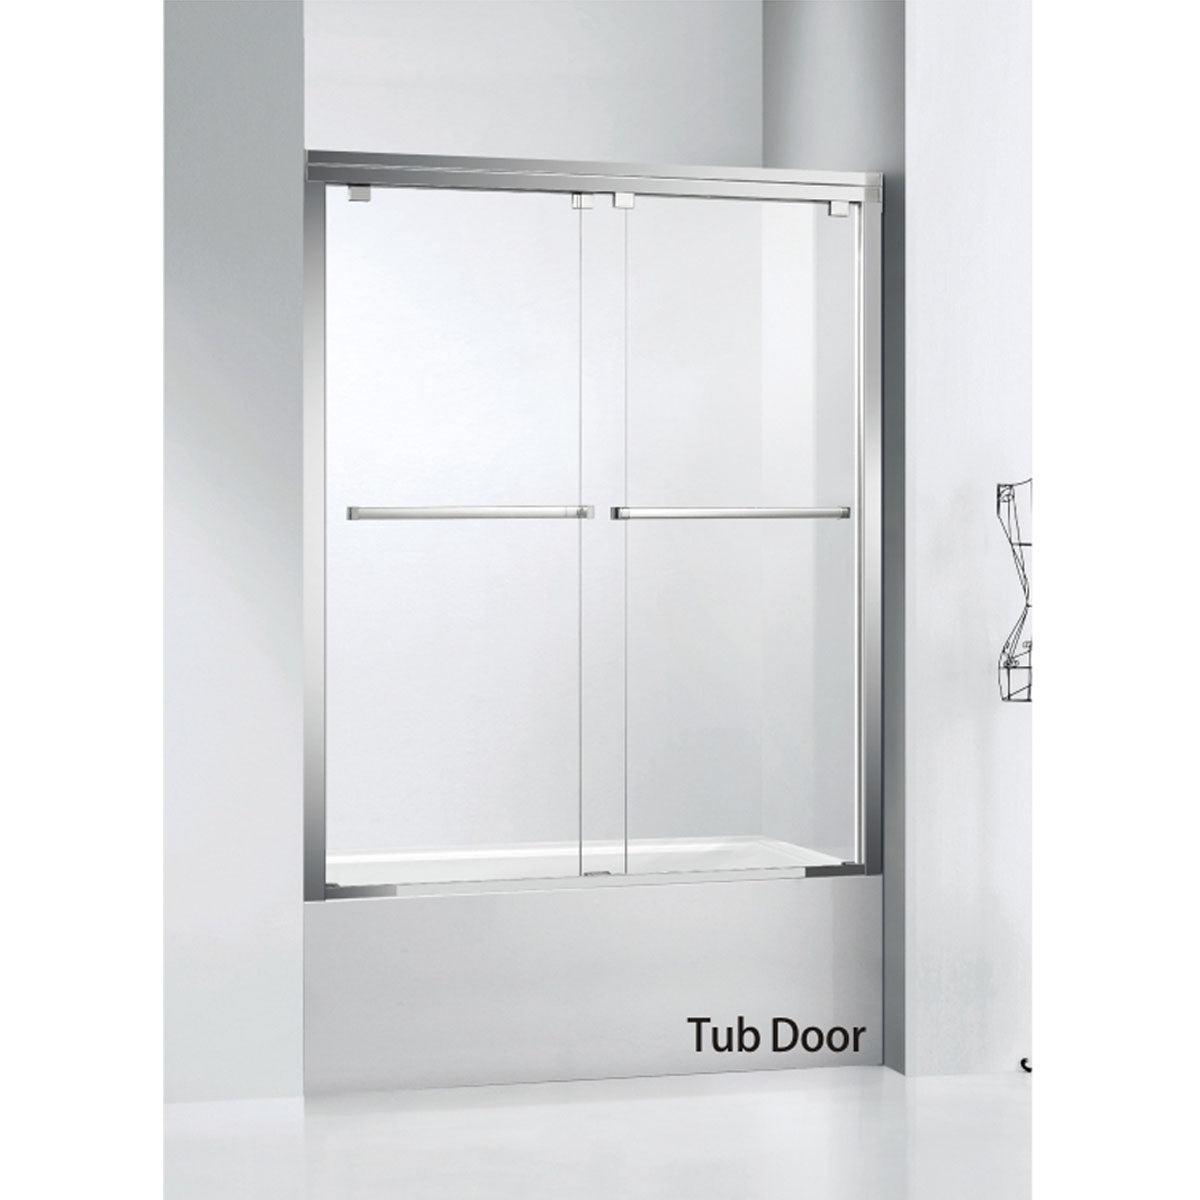 60"  Bypass Tub Door with Klearteck Treatment (5/16" Thickness) (Silver ) ASD Series - iStyle Bath